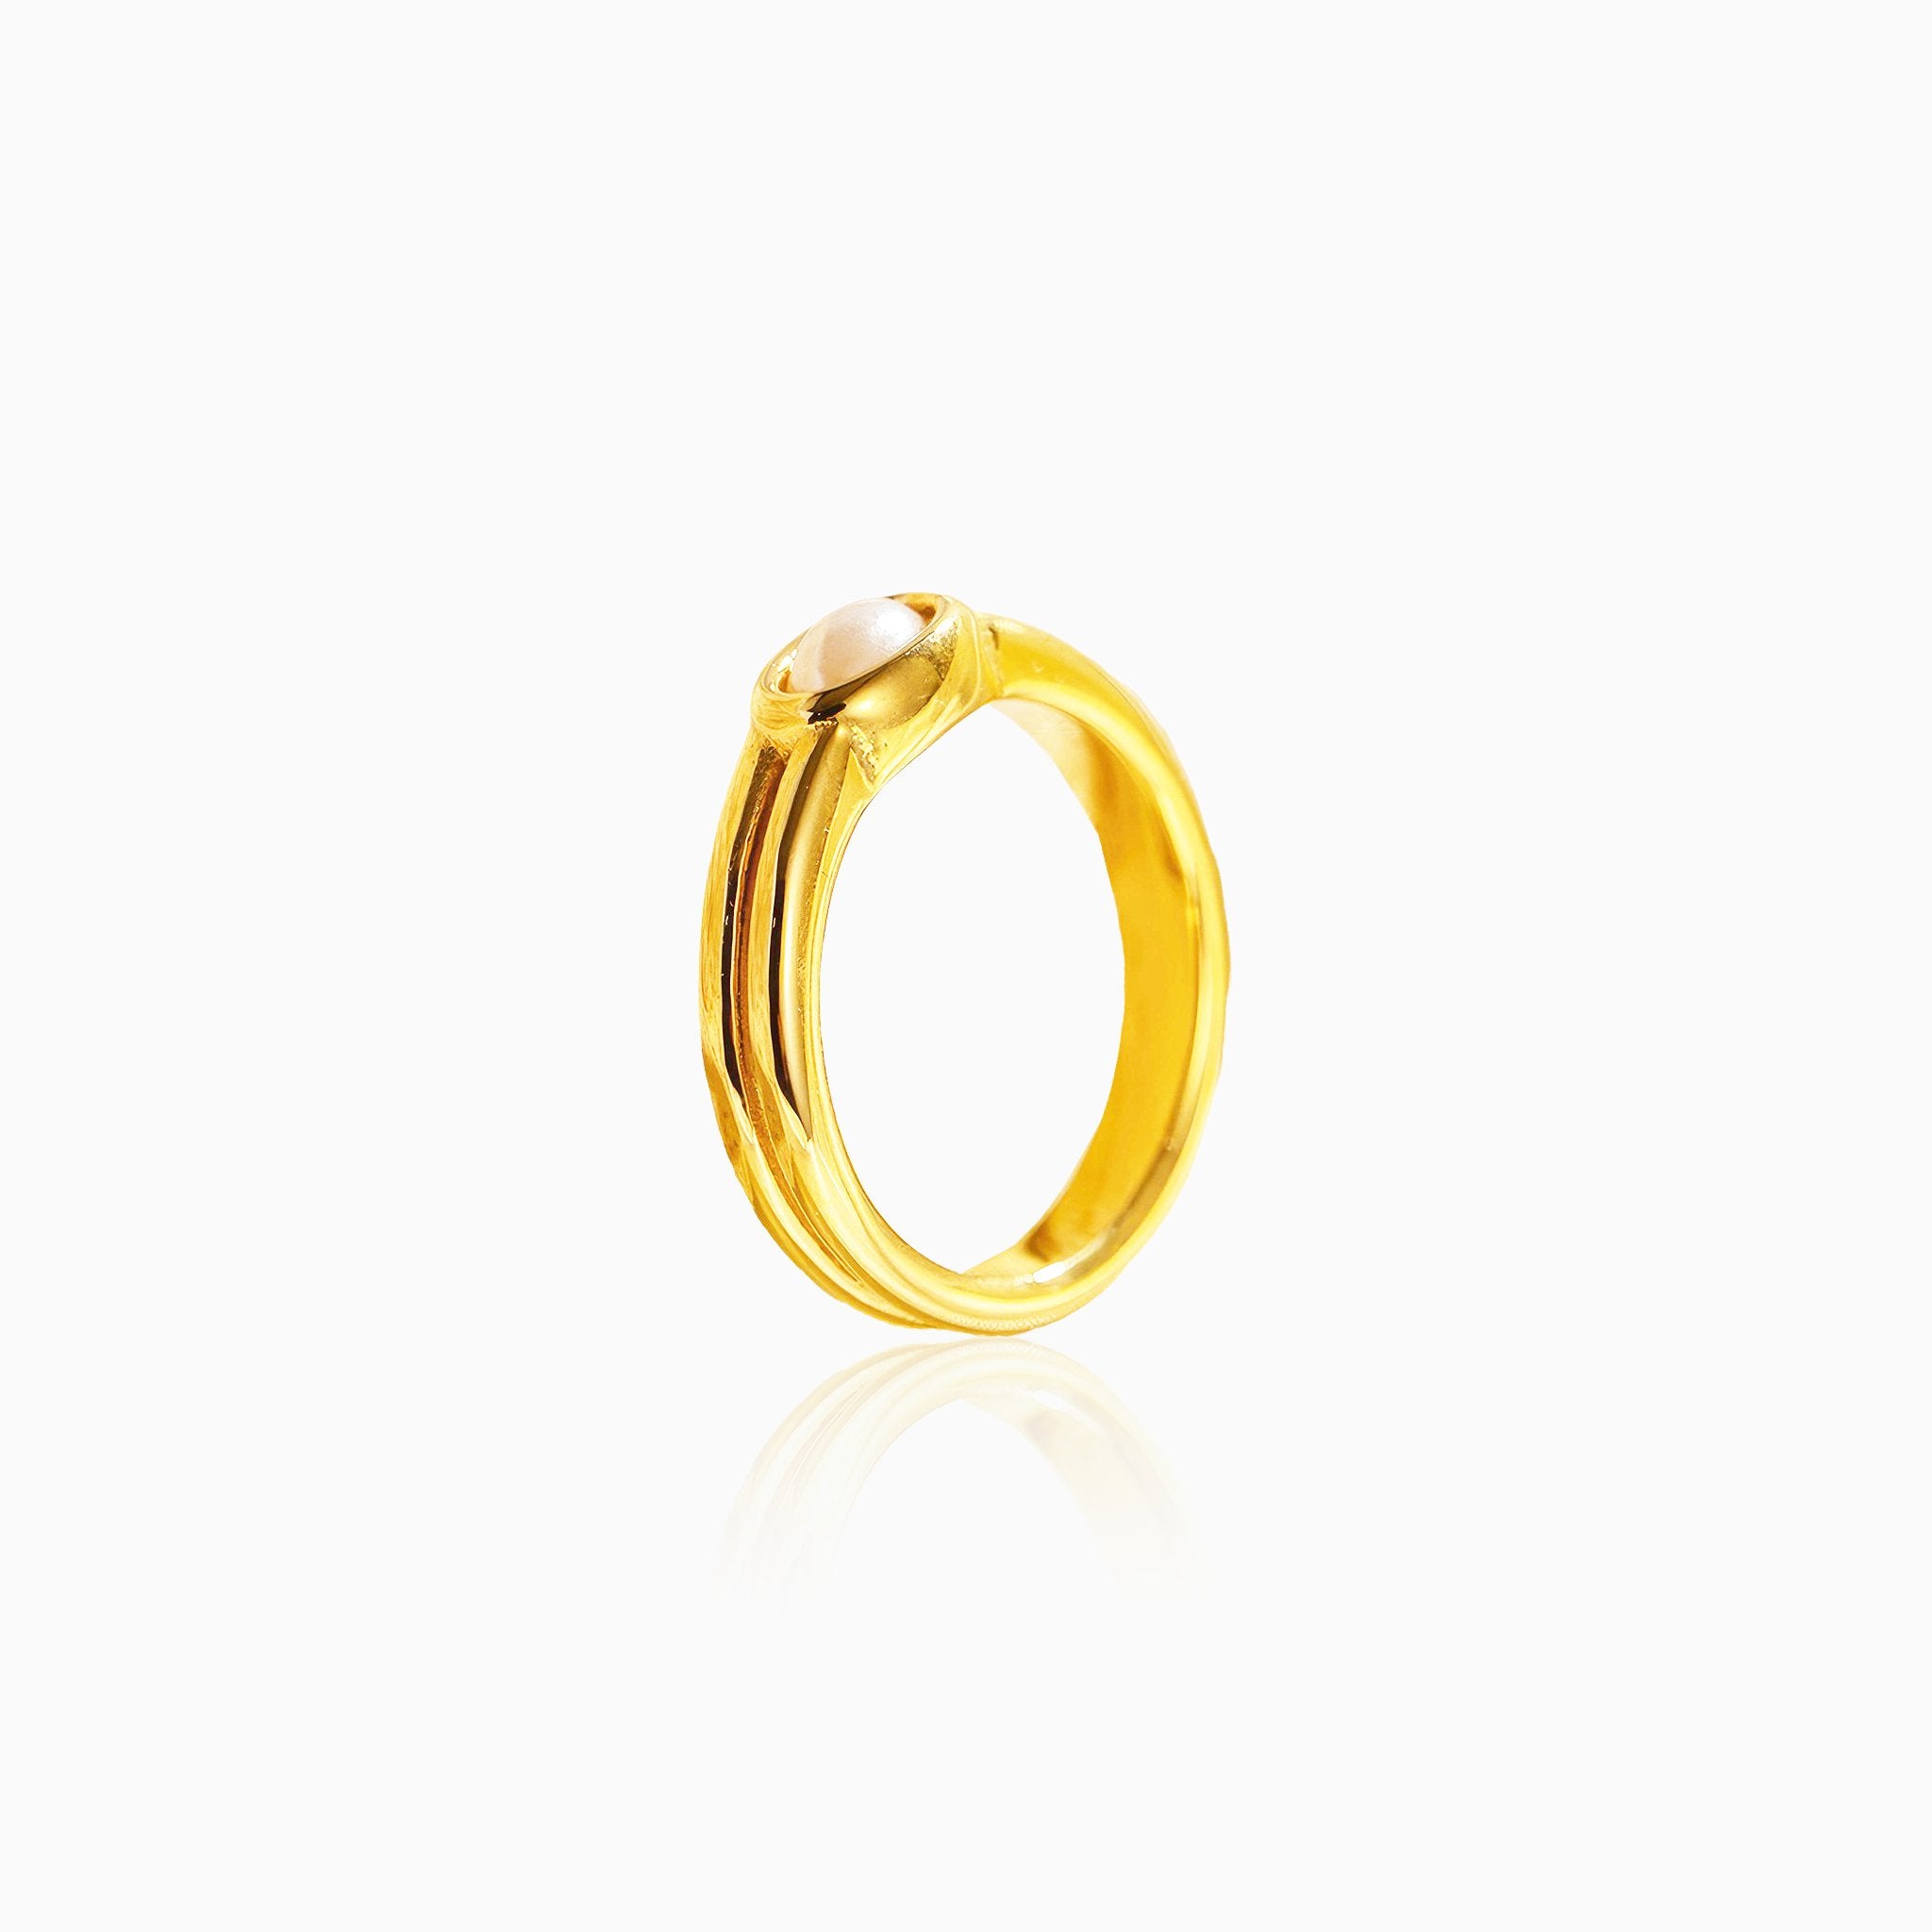 Pearl-Inlaid Geometric Ring - Nobbier - Ring - 18K Gold And Titanium PVD Coated Jewelry